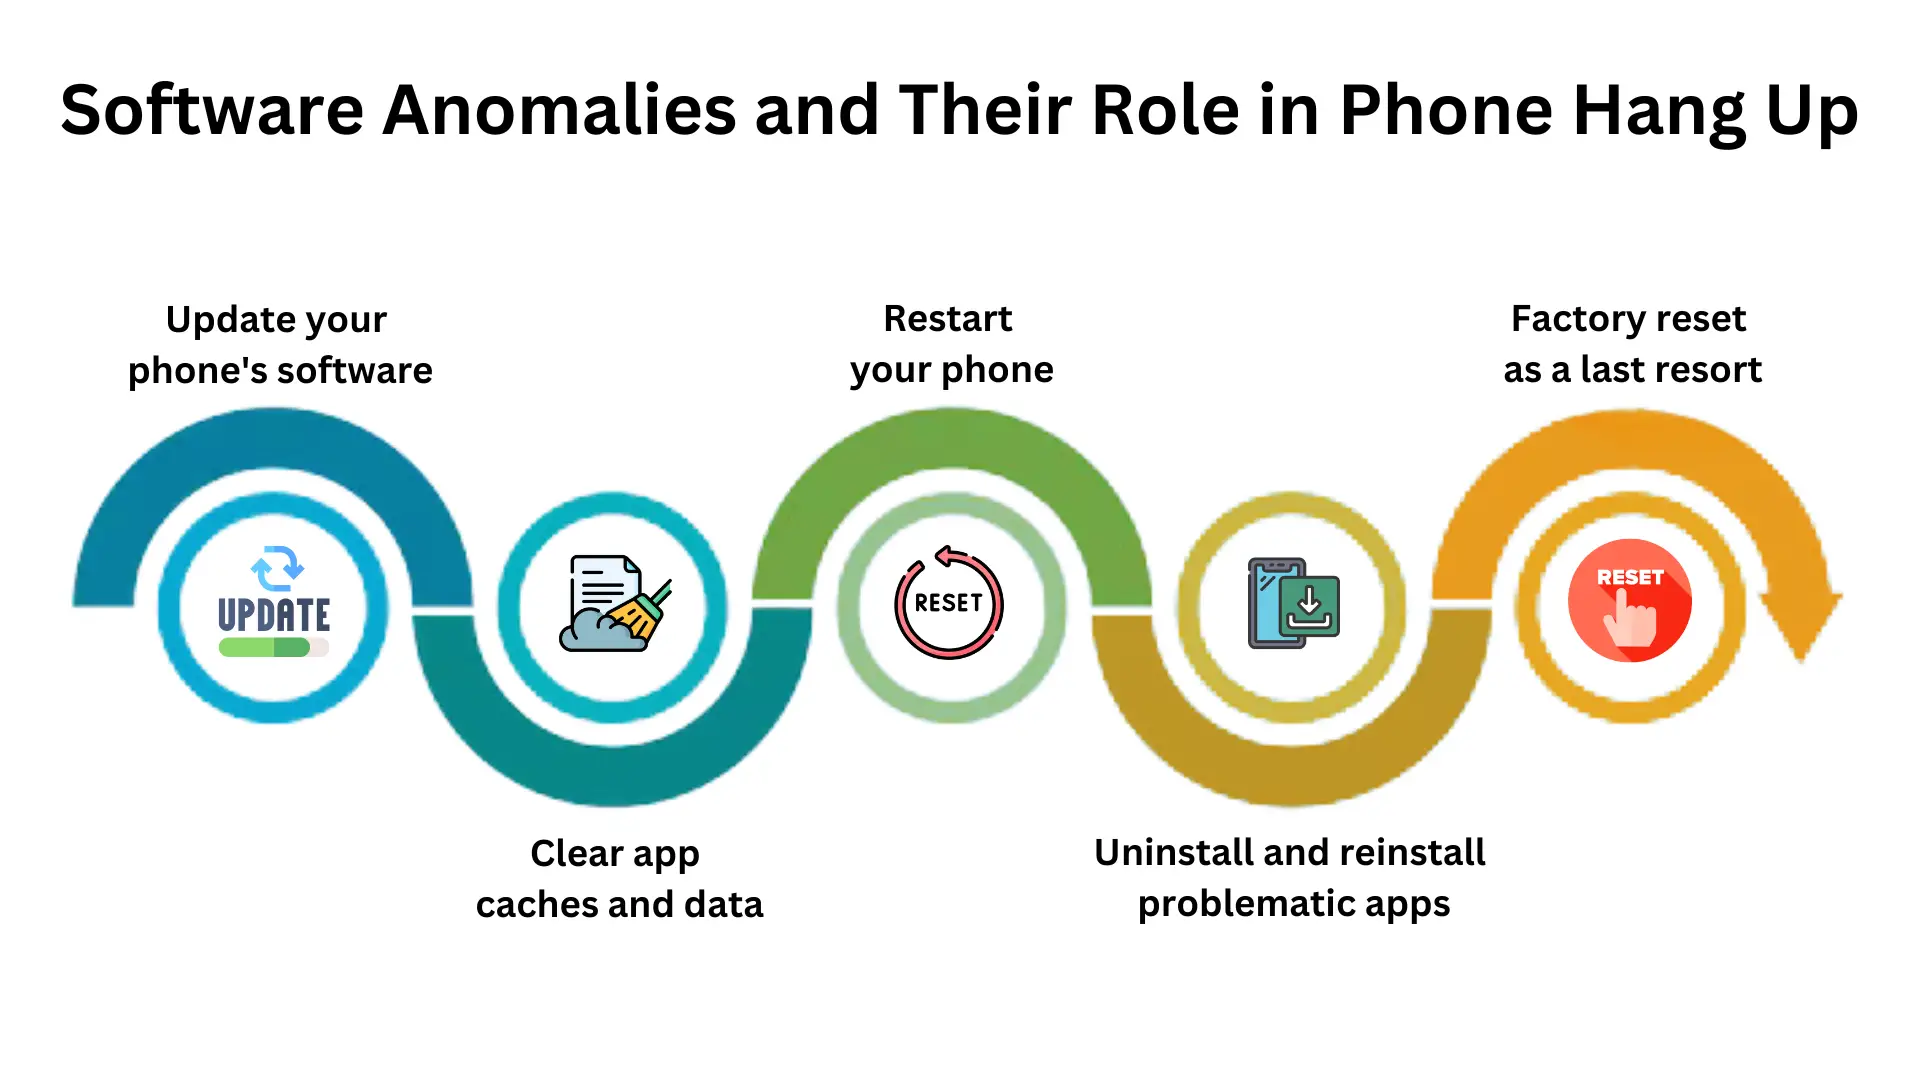 Software Anomalies and Their Role in Phone Hang Up